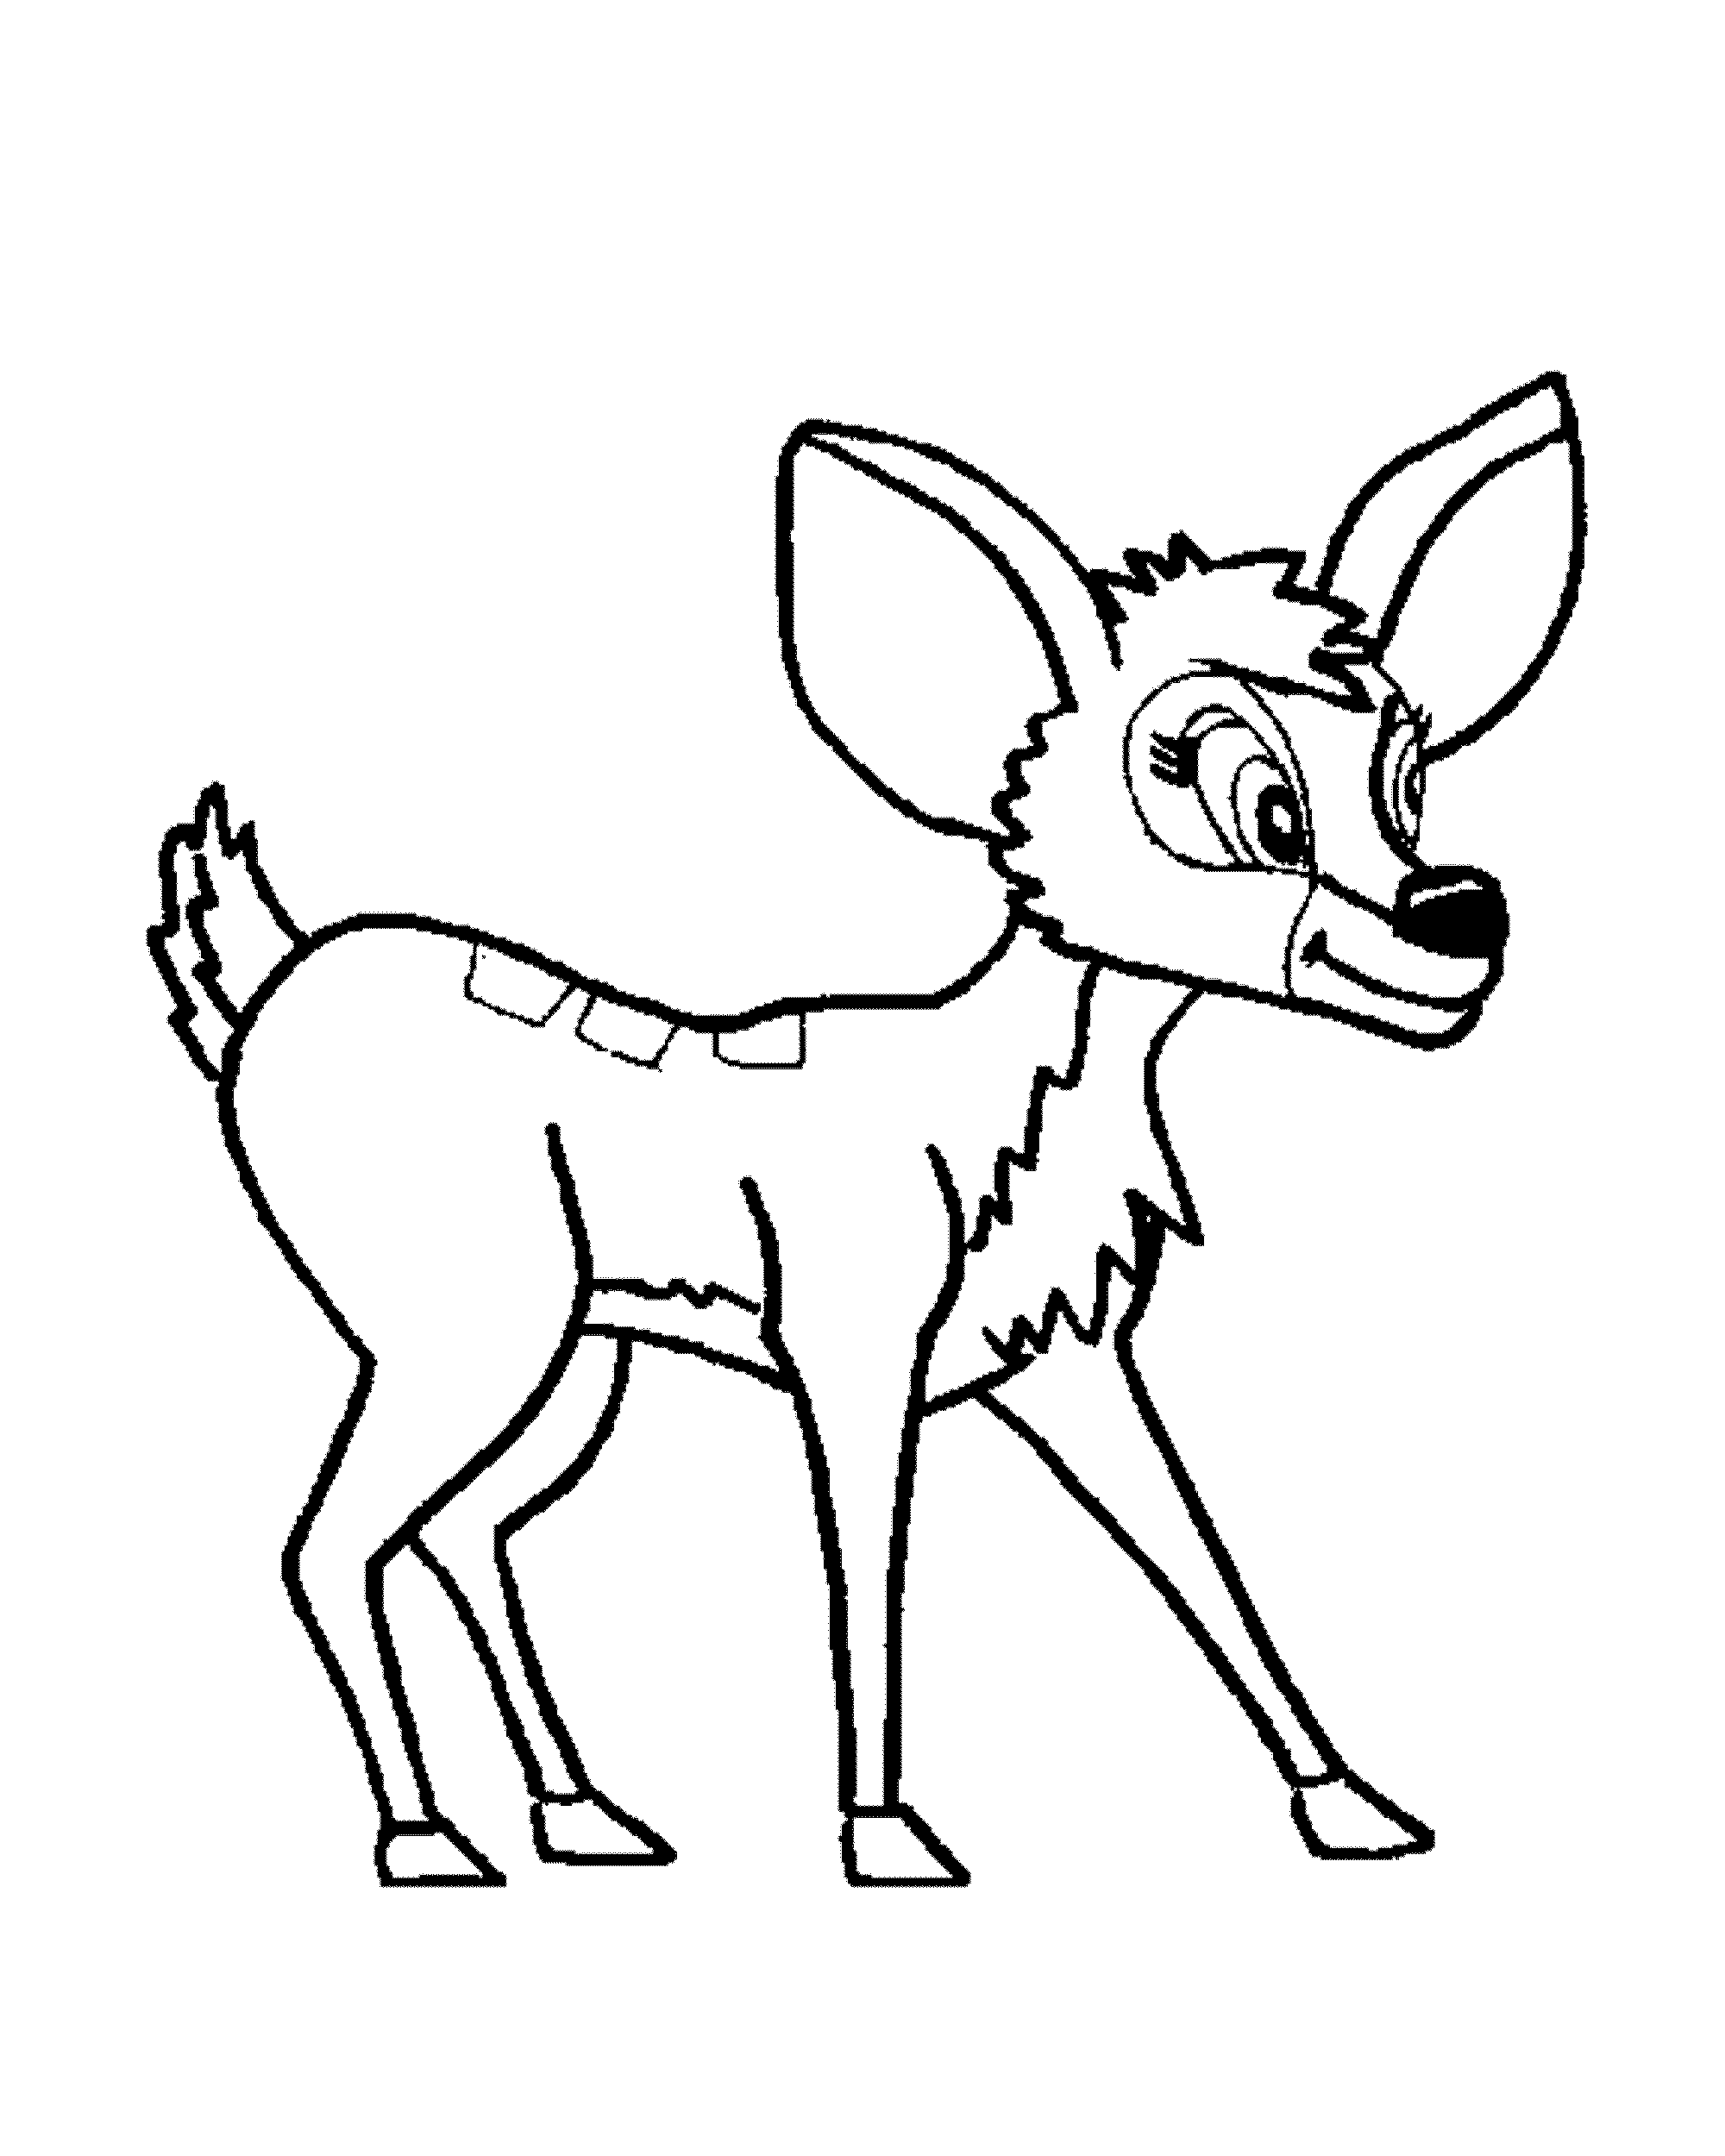 Coloring page: Deer (Animals) #2667 - Printable coloring pages